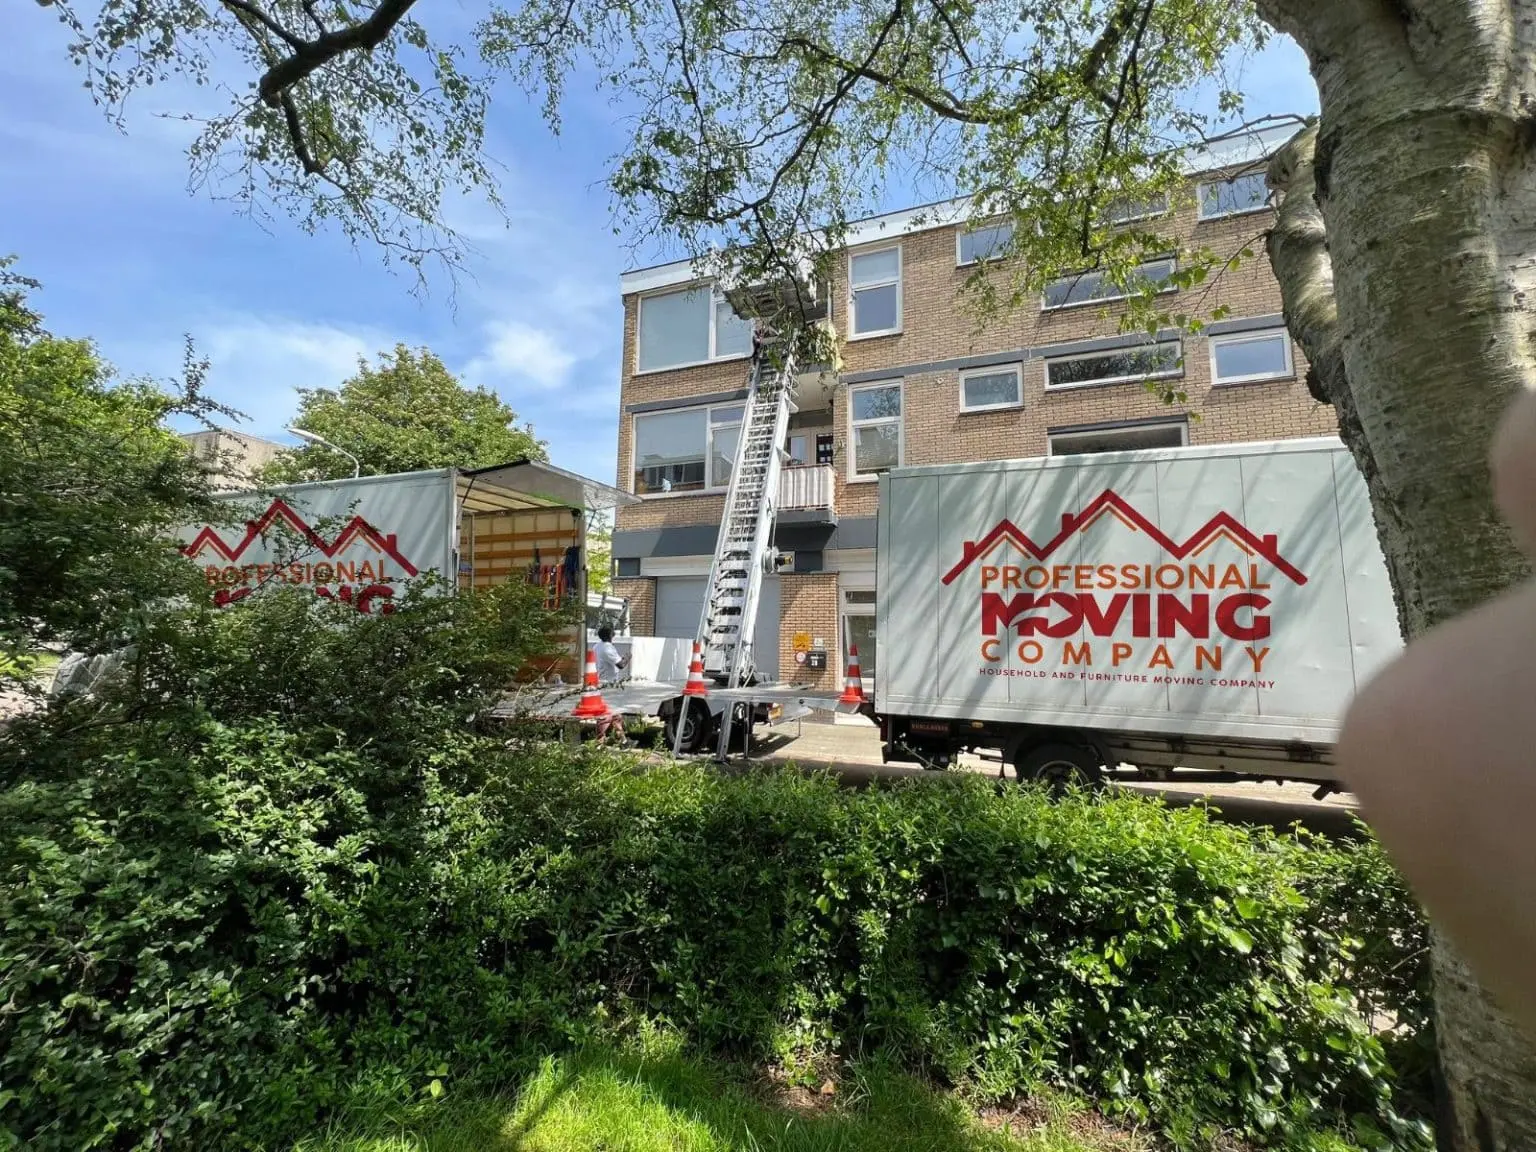 Moving Company Schiedam | Tailored Moving Services in Schiedam for Your Relocation Needs